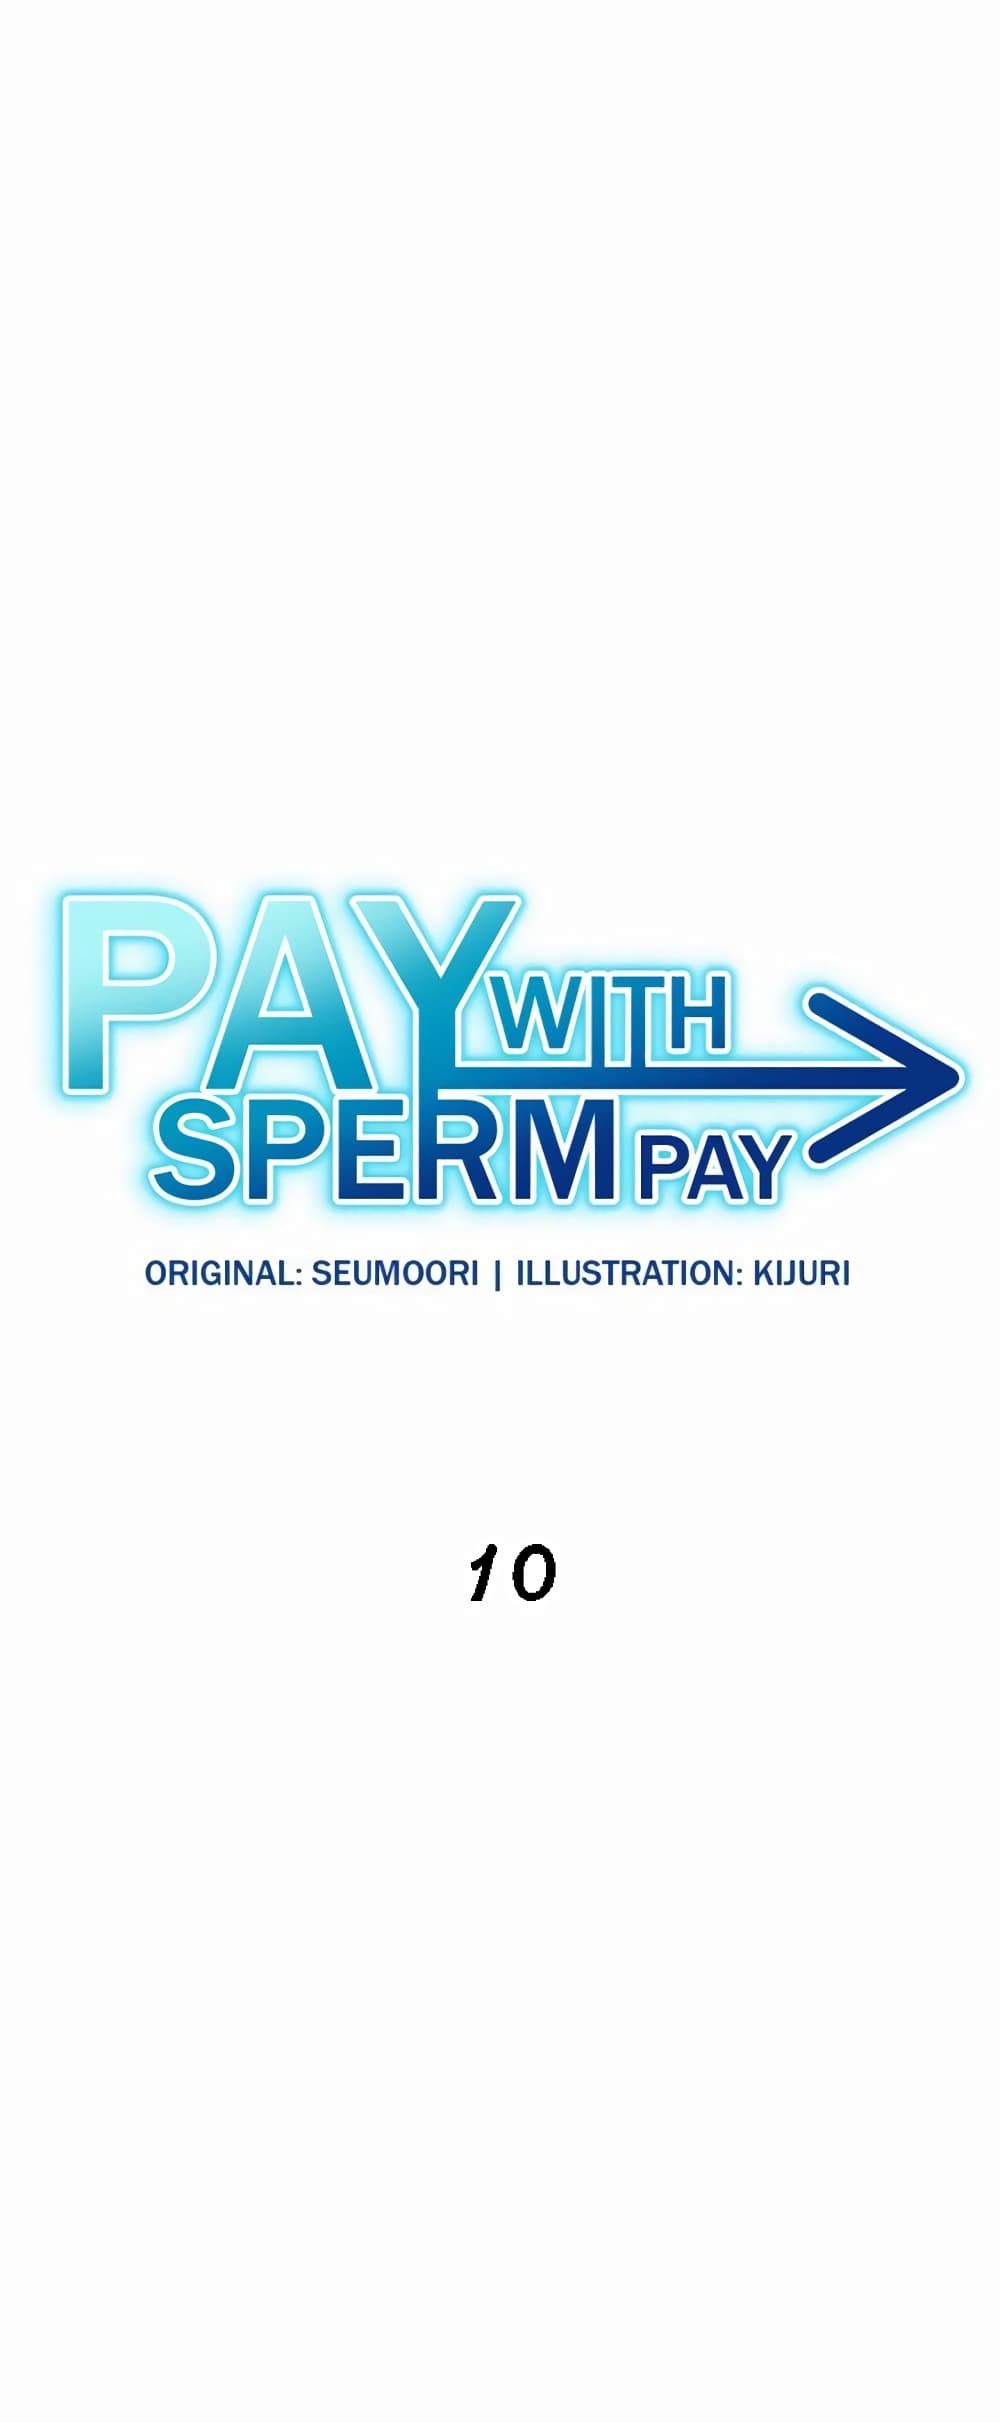 Pay with Sperm Pay 10-10